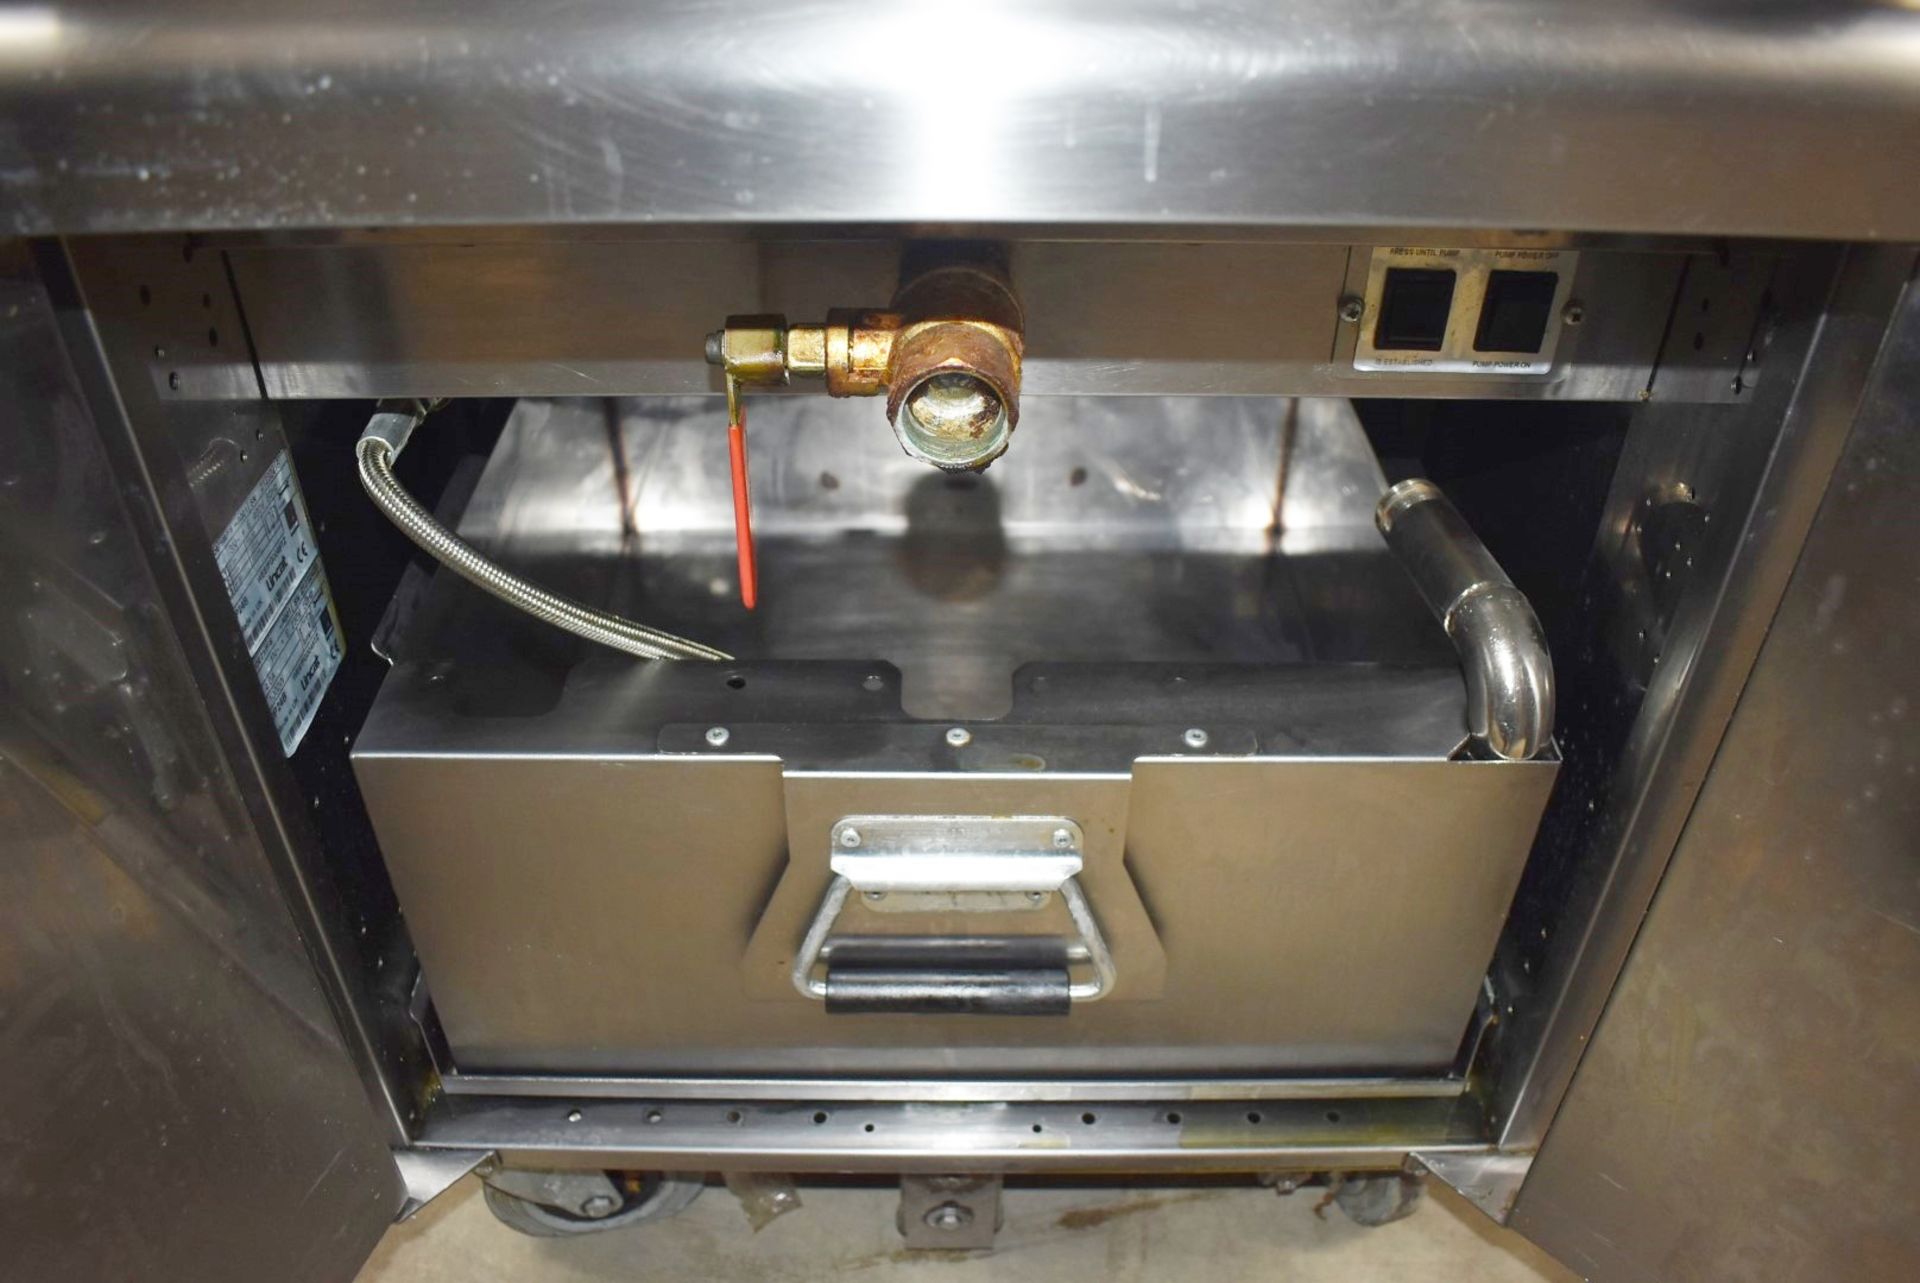 1 x Lincat Opus 700 Single Tank Electric Fryer With Built In Filtration - 3 Phase - Image 11 of 19